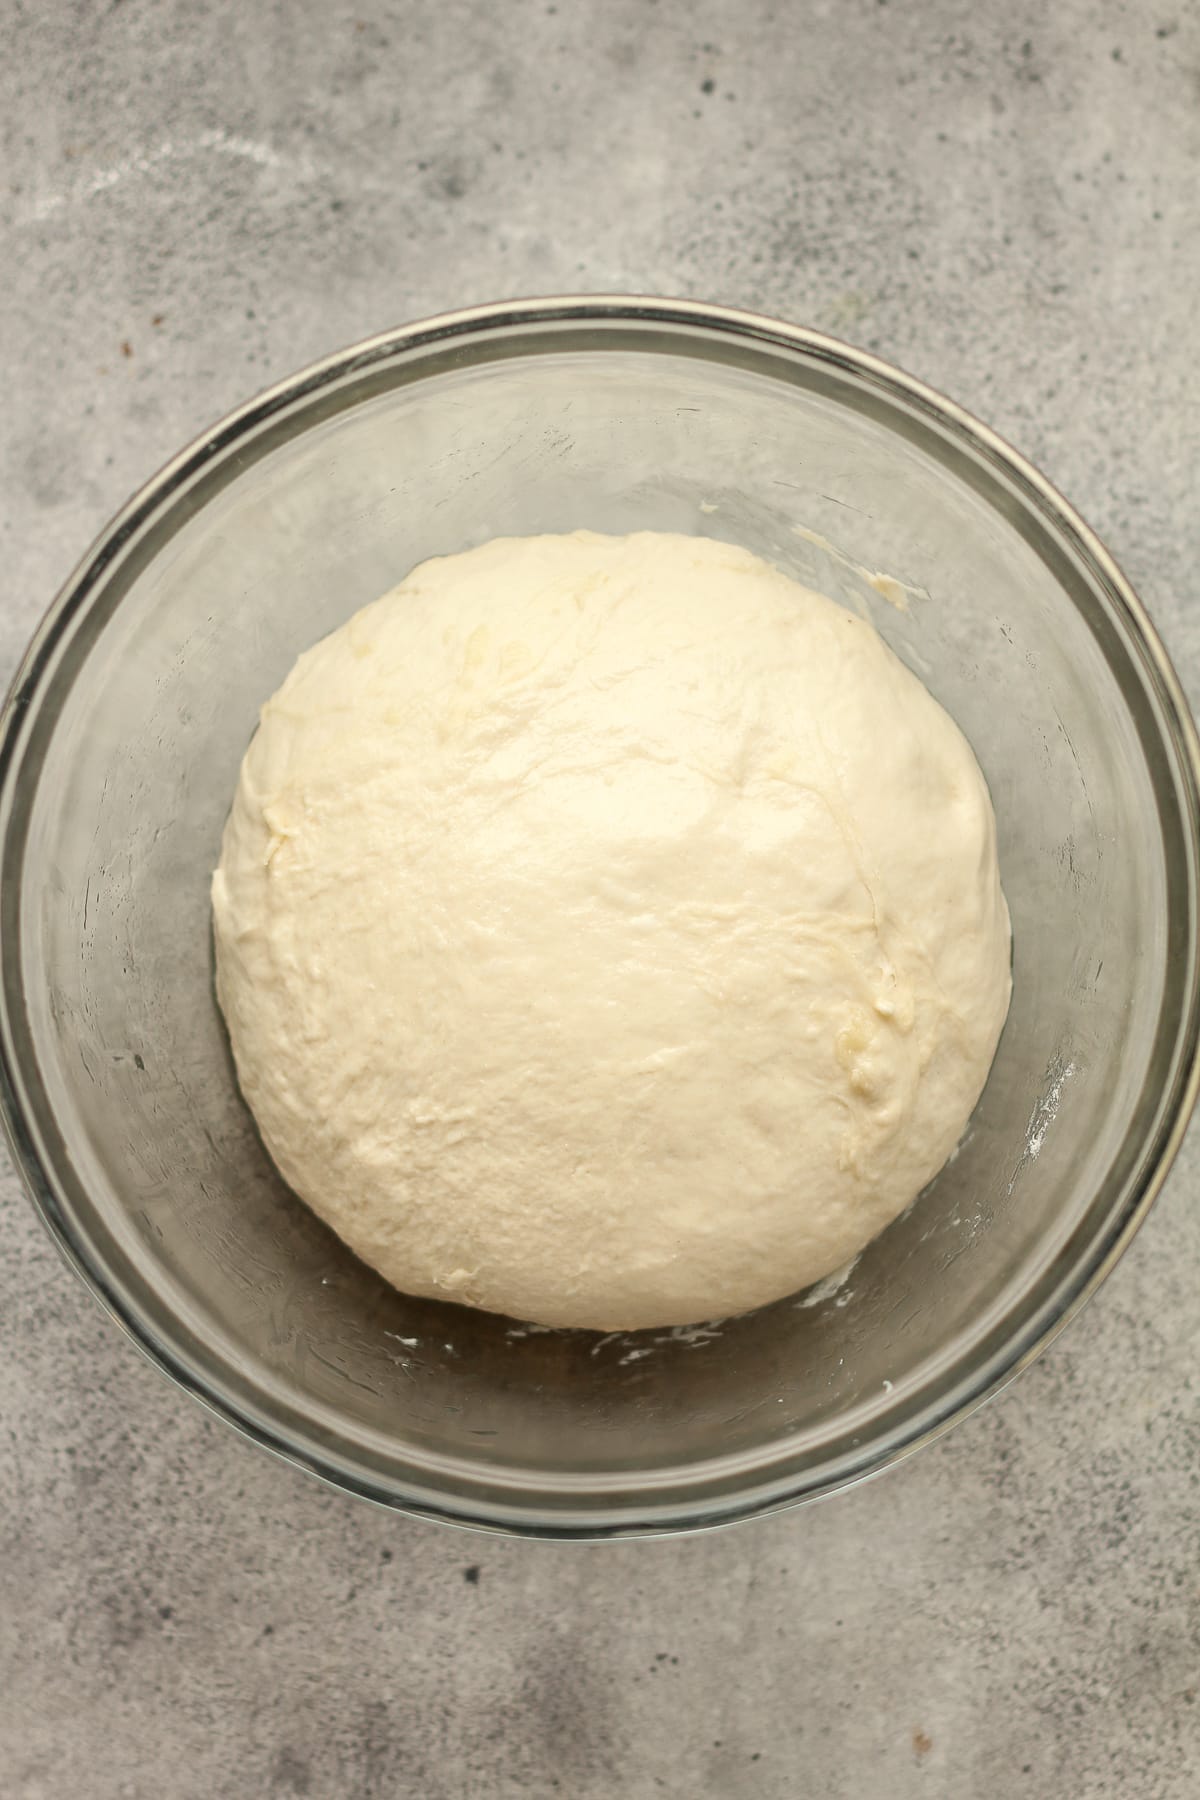 The pizza dough in a glass bowl.